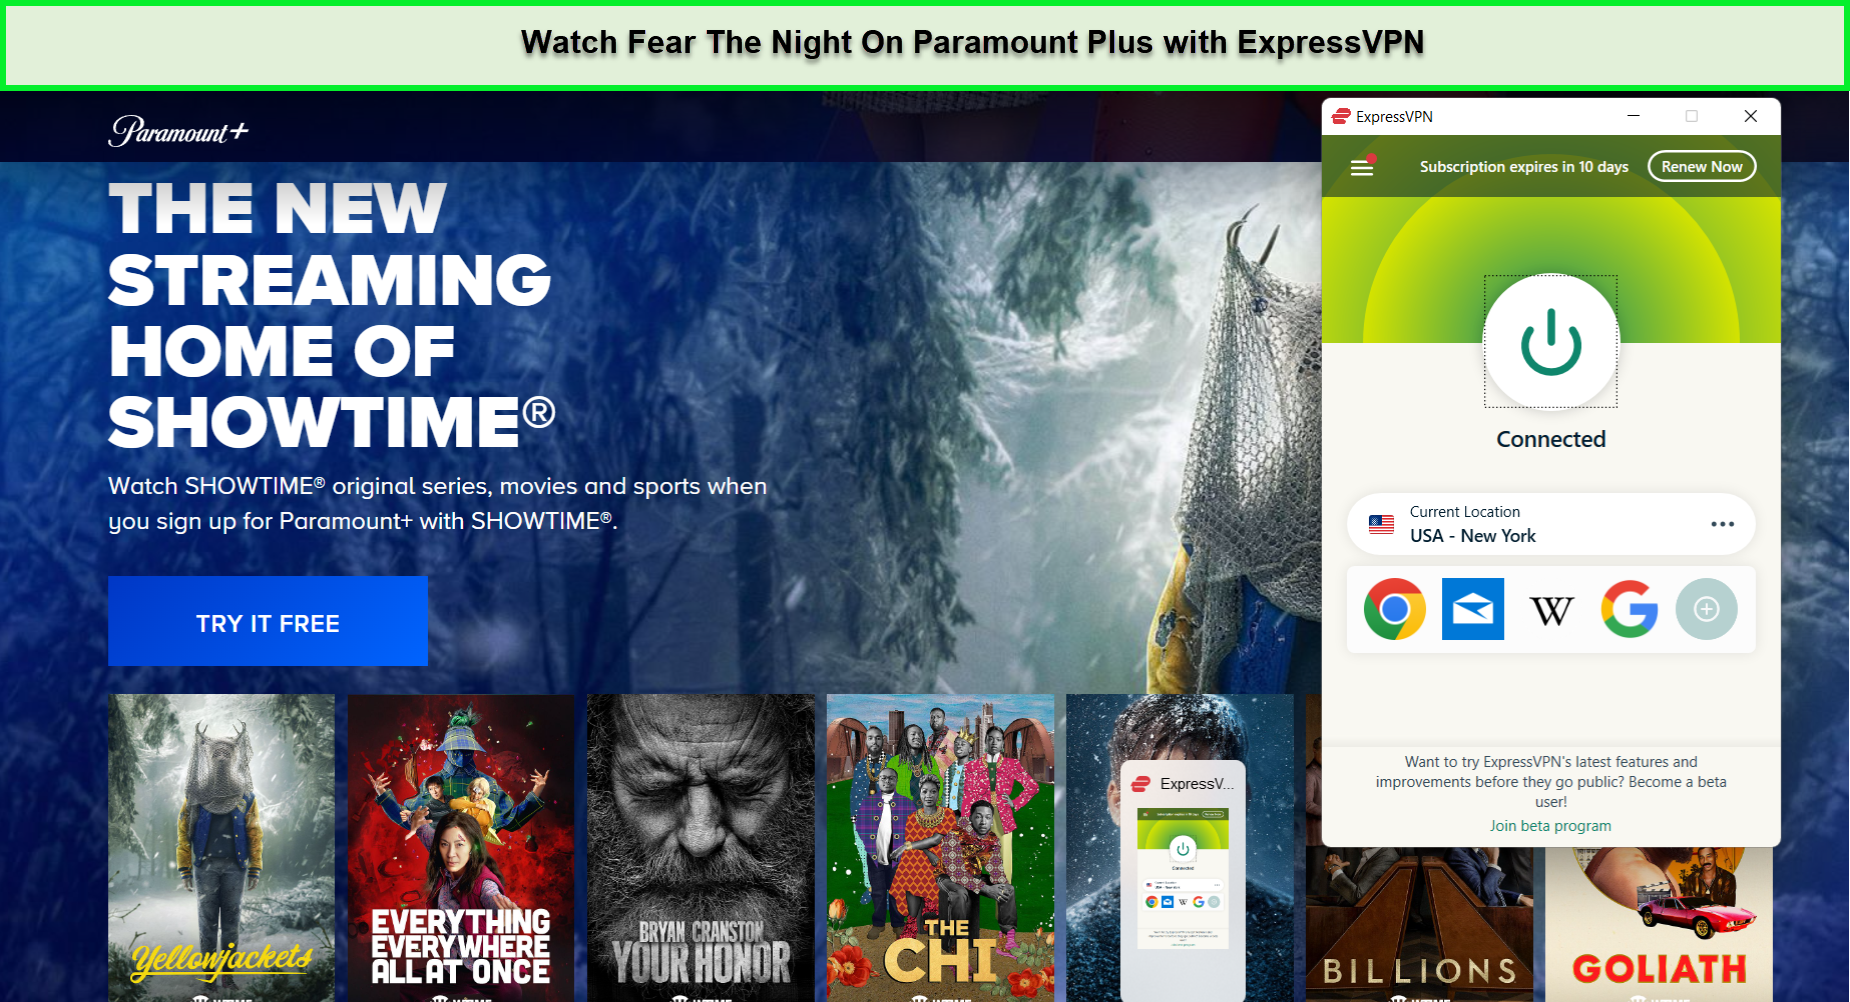 Watch-fear-the-night-with-expressvpn-on-paramount-plus